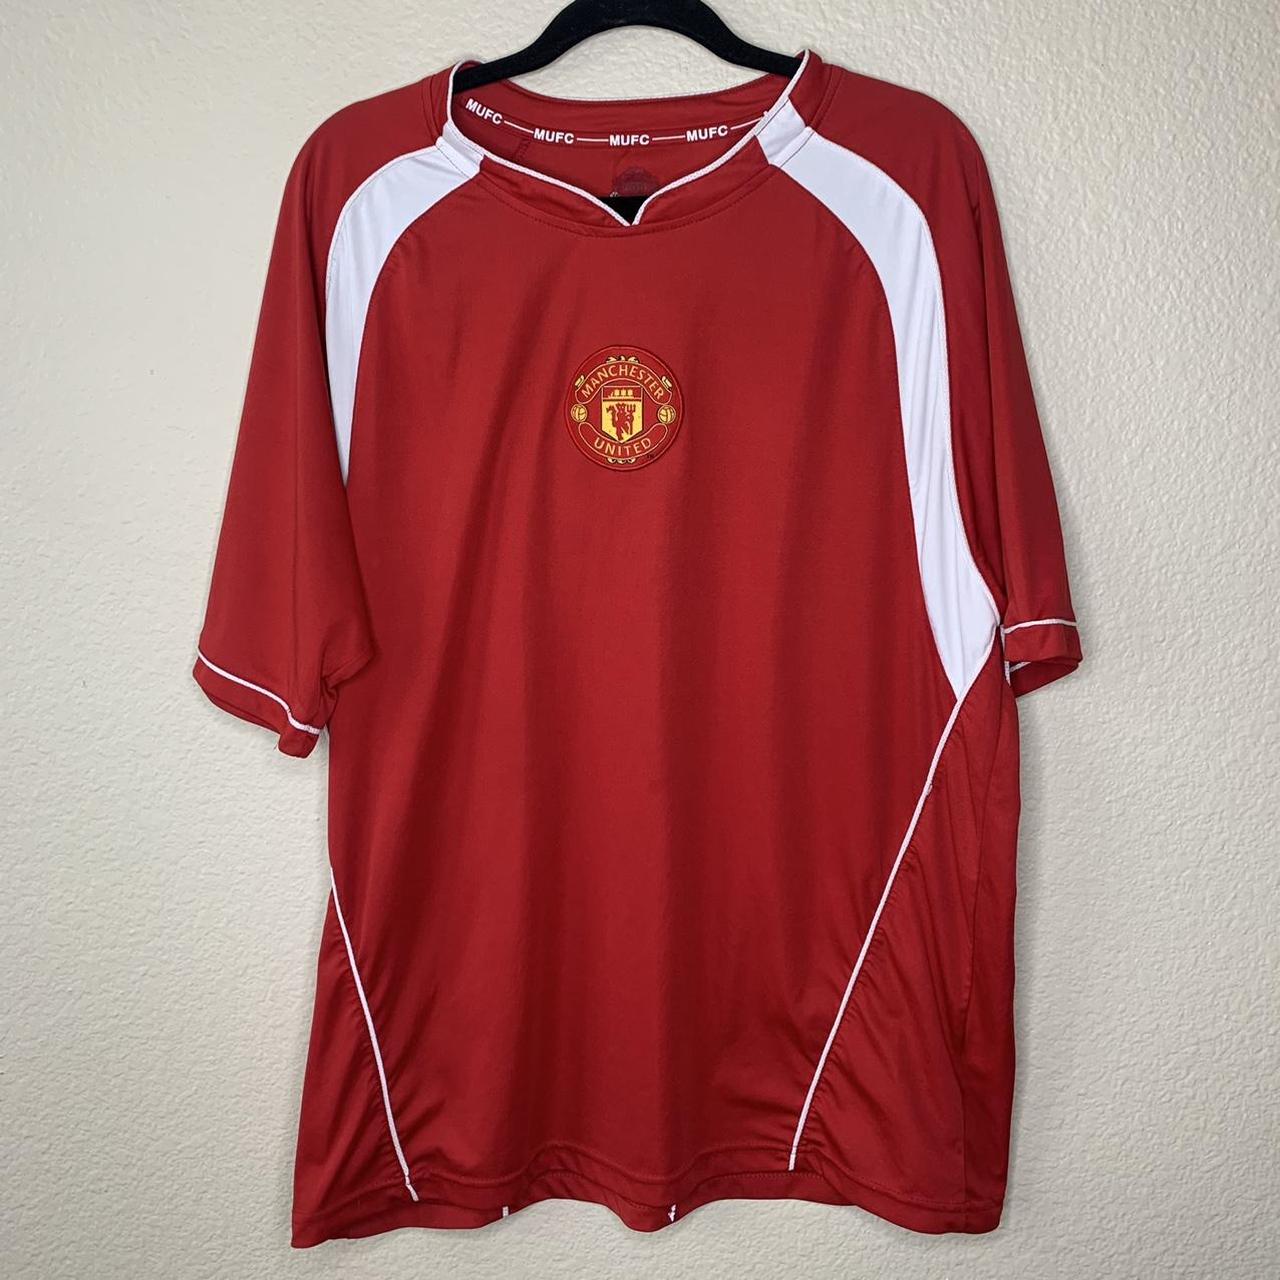 Product Image 1 - Manchester United training jersey .
•
#manchester